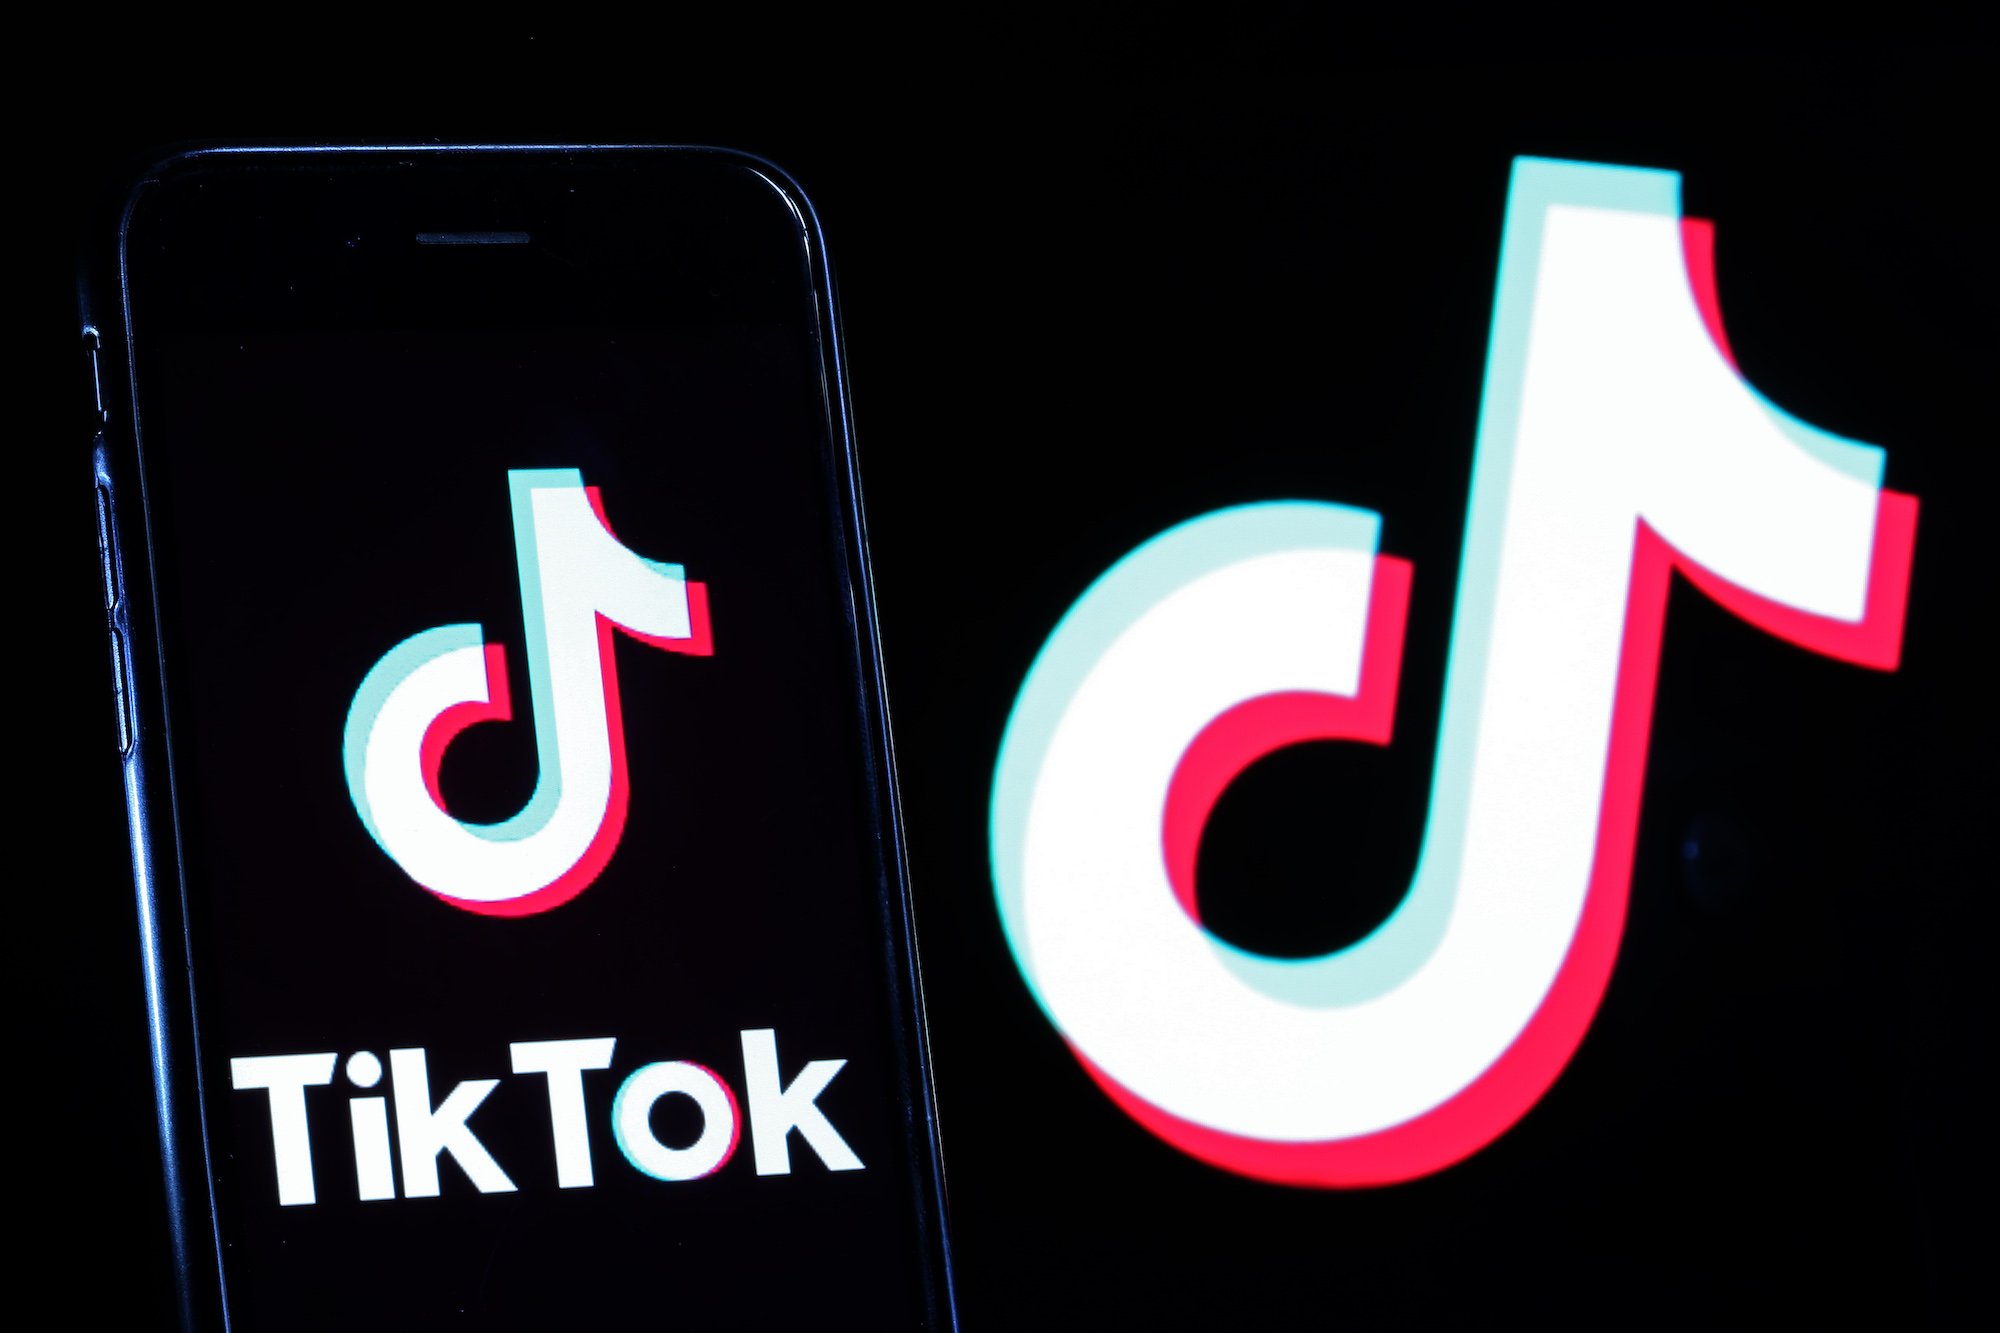 TikTok logo displayed on a smartphone in front of a screen with the TikTok logo